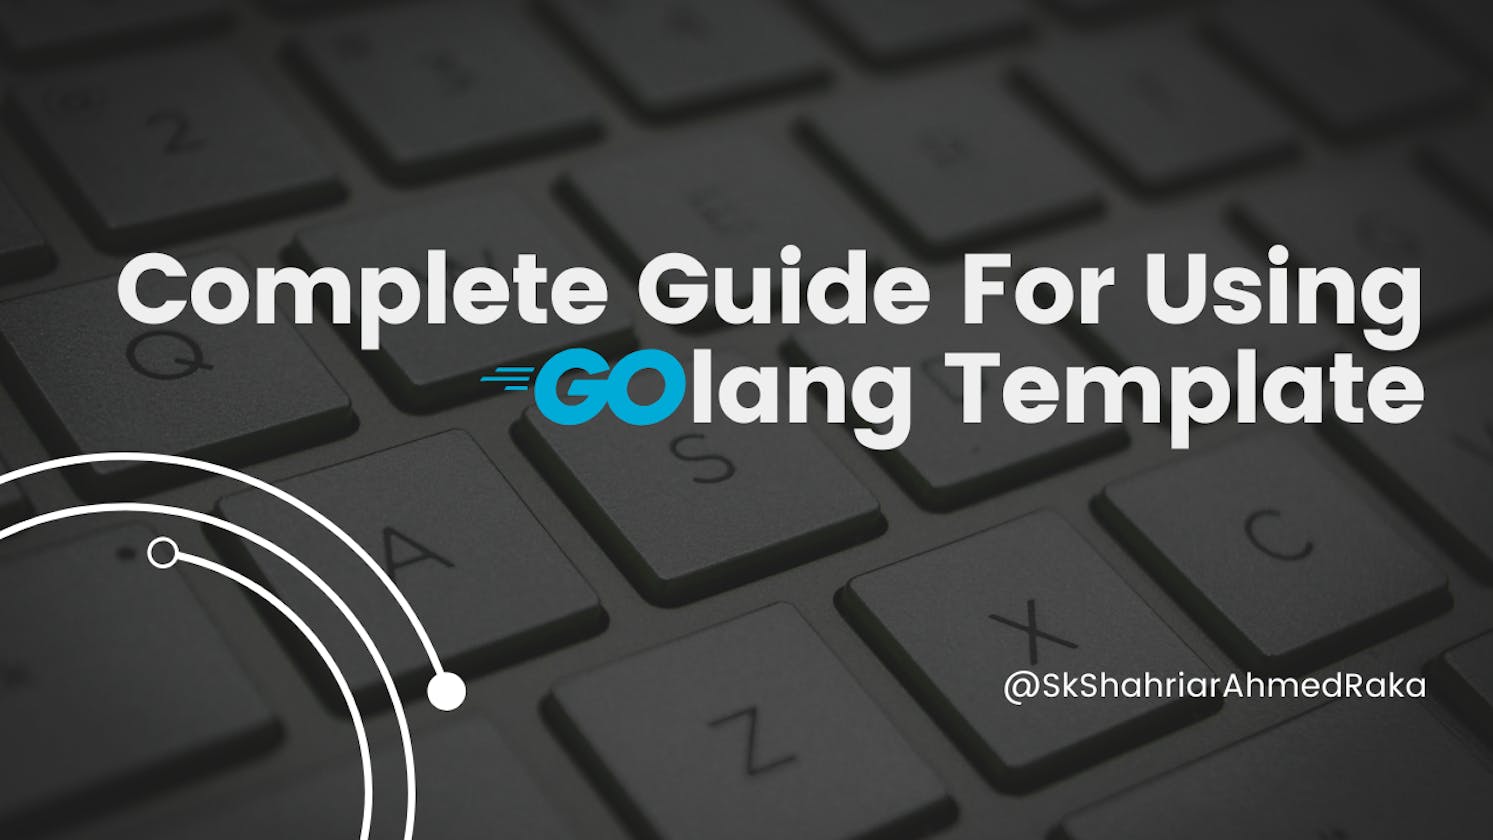 Complete Guide For Using Golang Template